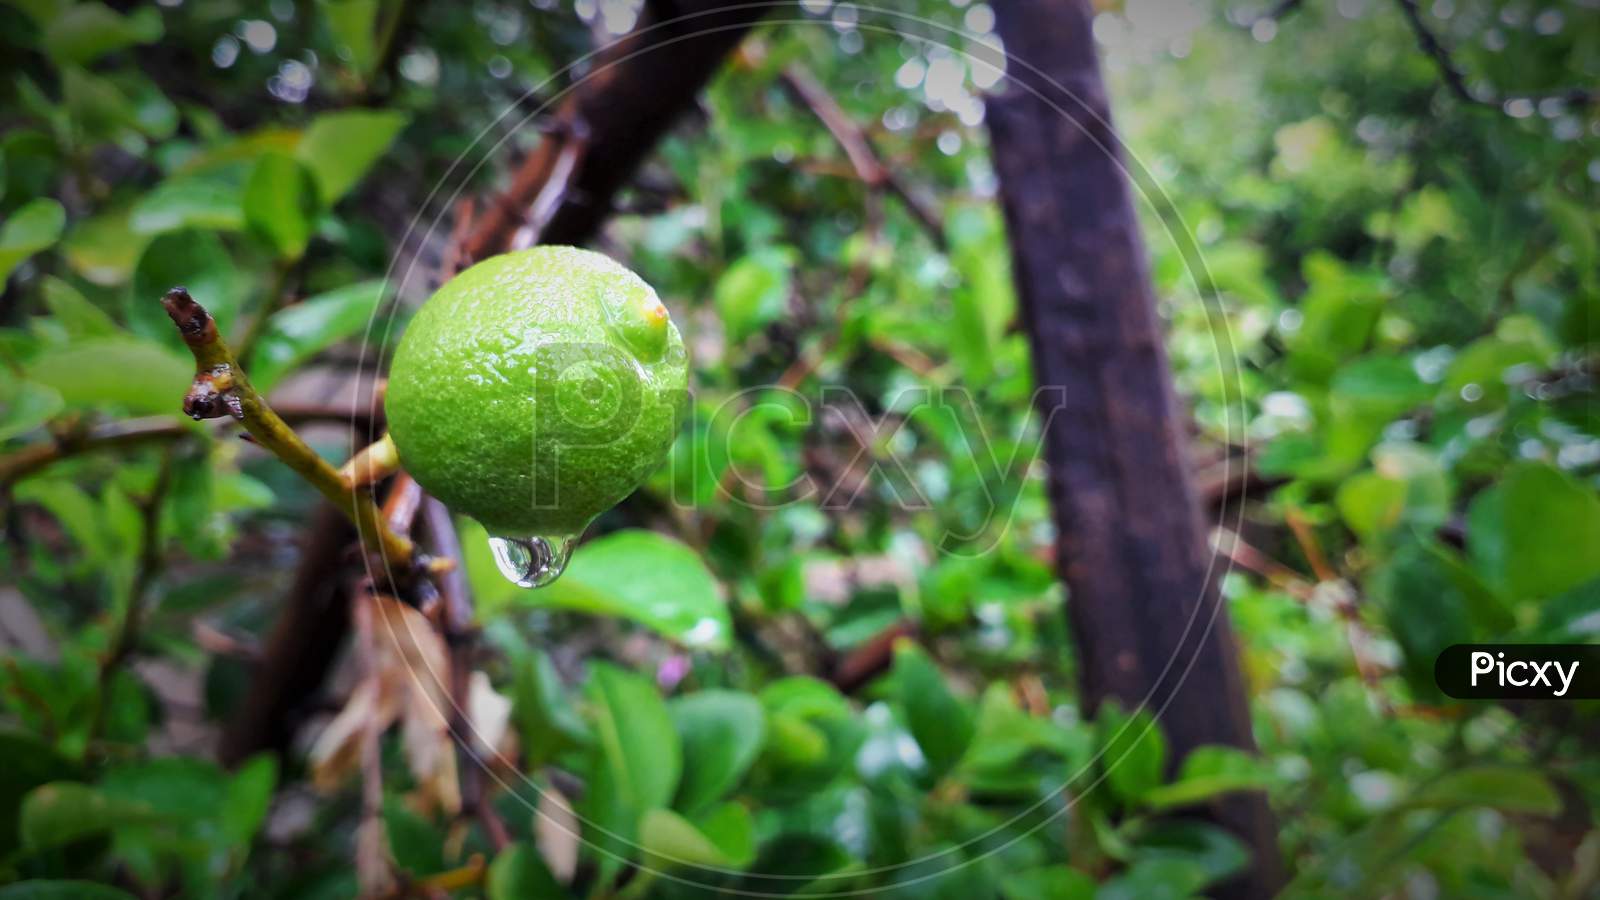 Green Raw Lemon Hanging On Branch With Water Drops In Rain